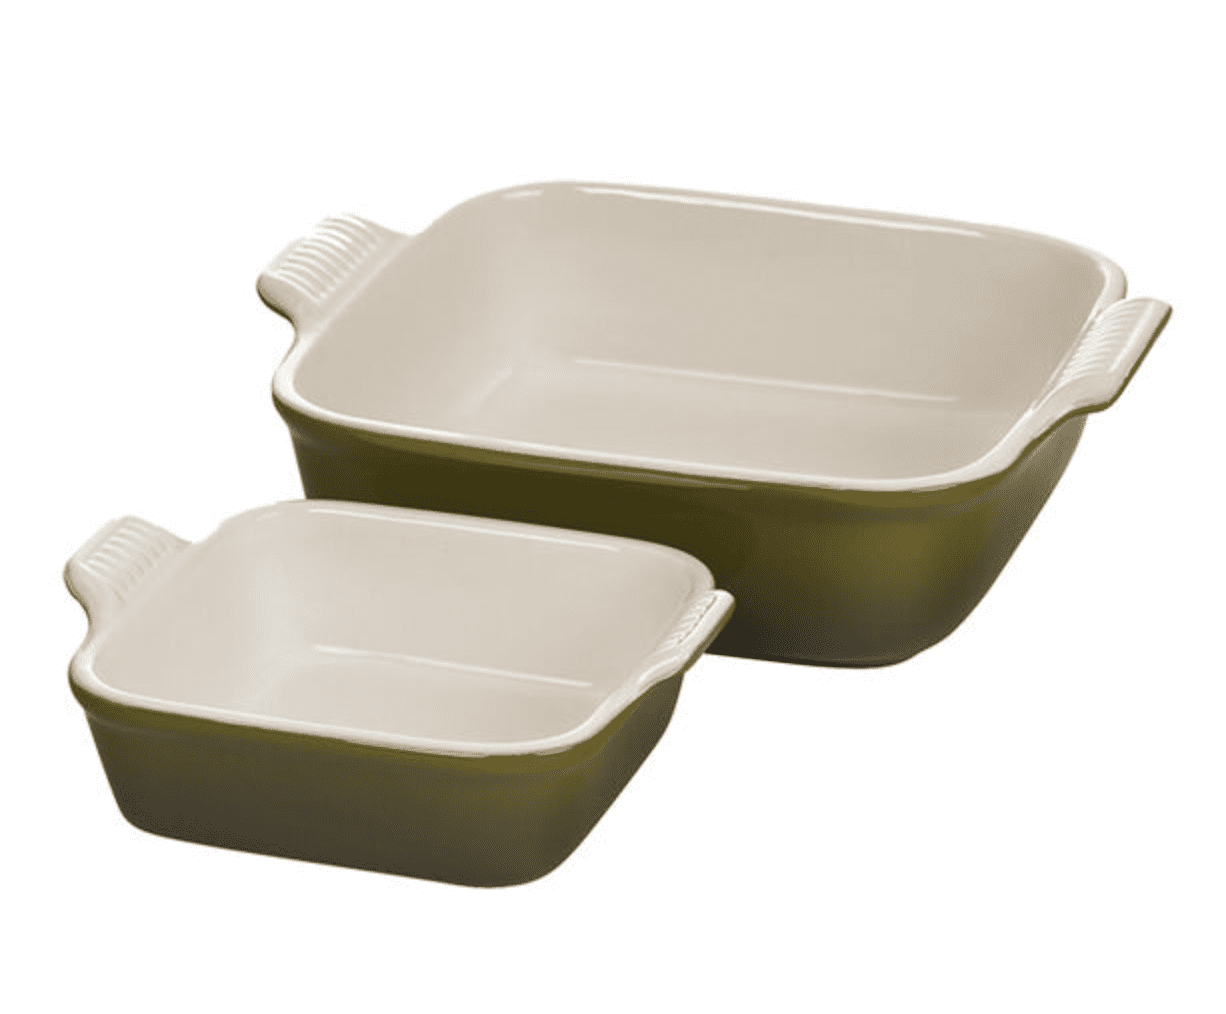 http://cdn.apartmenttherapy.info/image/upload/v1695227192/commerce/Le-Creuset-2-Piece-Square-Baking-Dish-Set.png